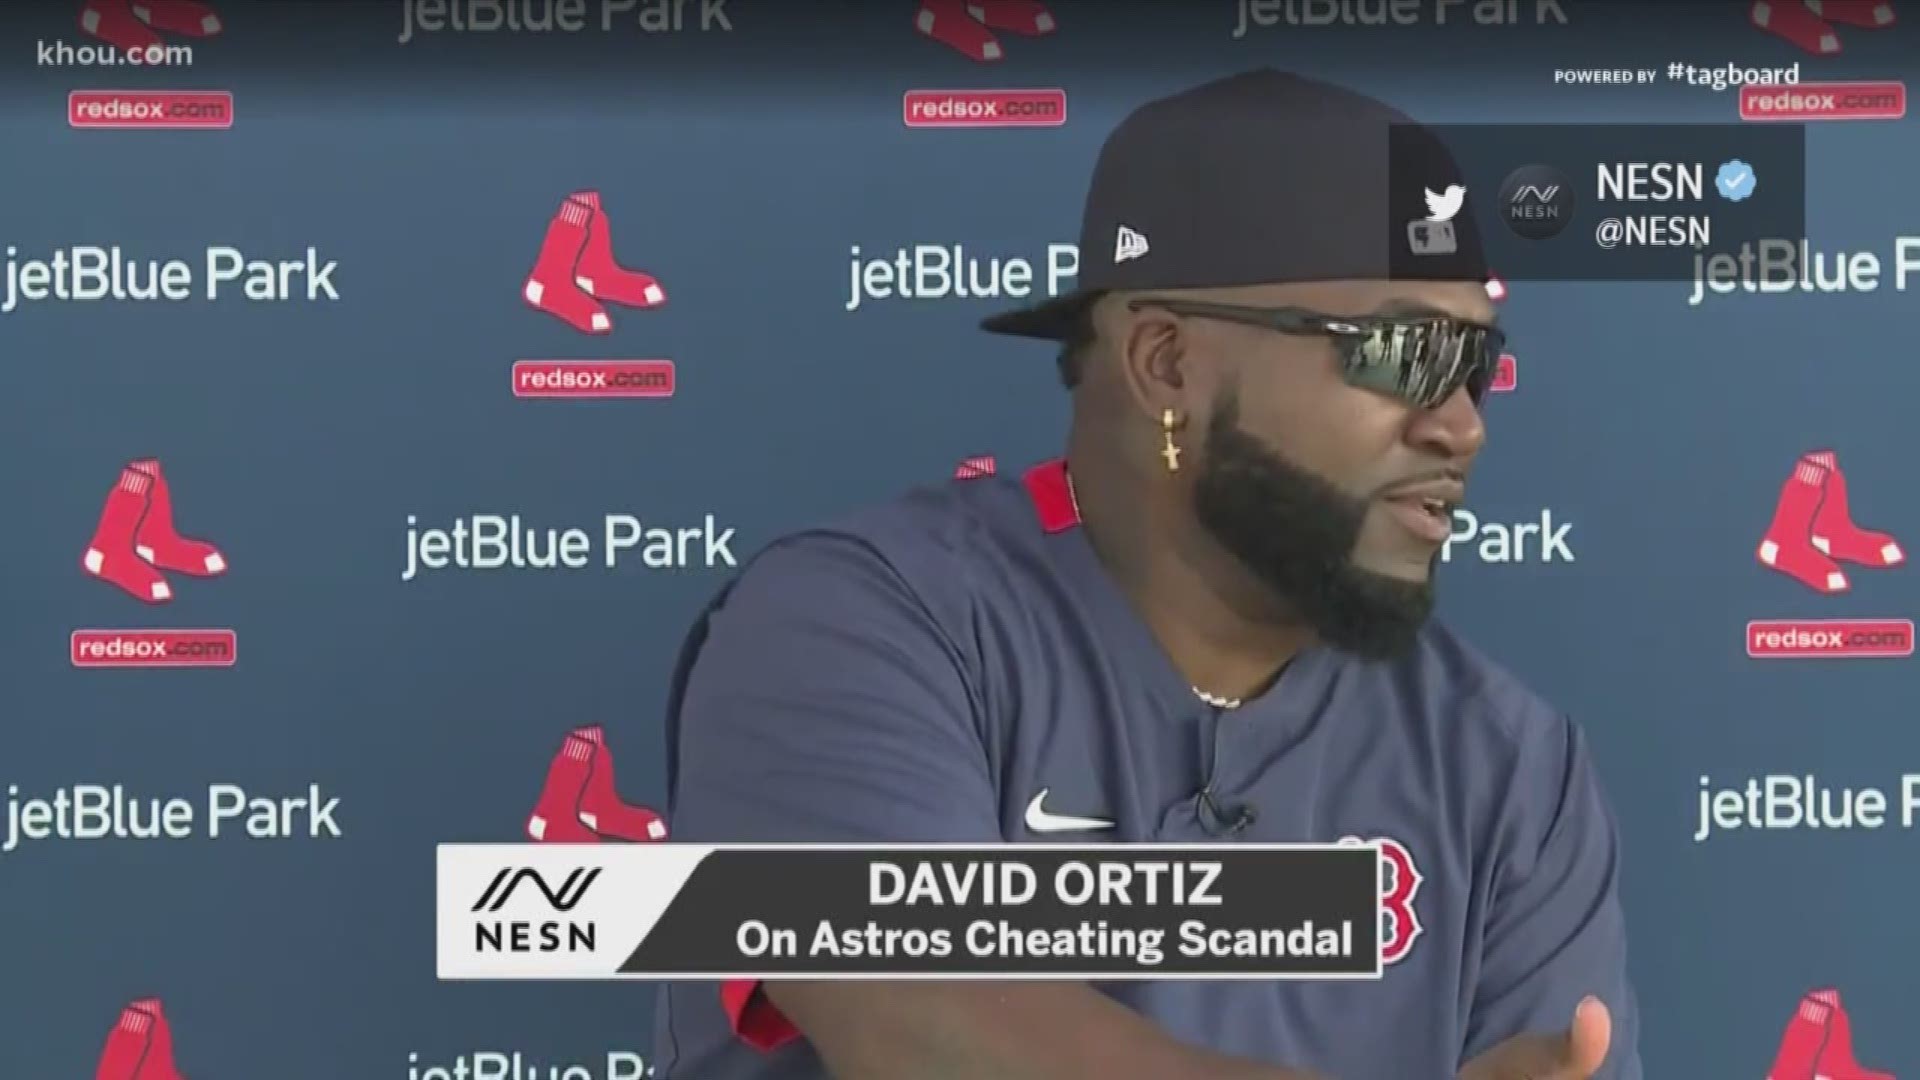 “Big Papi” David Ortiz told reporters he believes whistleblower Mike Fiers looks like a "snitch" for going on the record with the Astros' sign-stealing scheme.